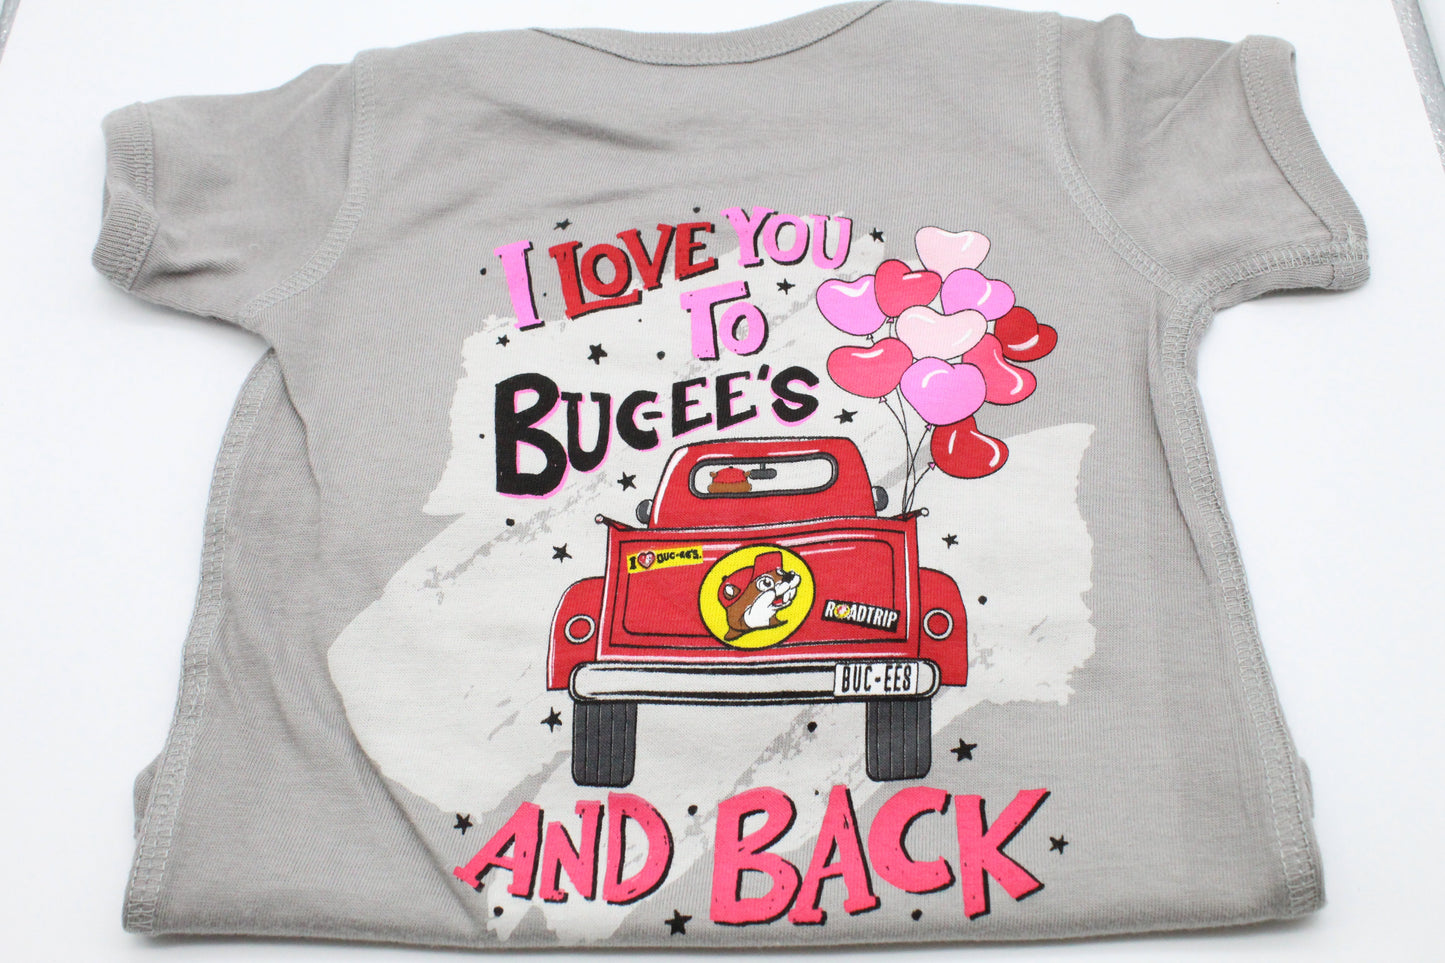 Buc-ee's "I Love You to Buc-ee's and Back" Valentine's Day Onesie